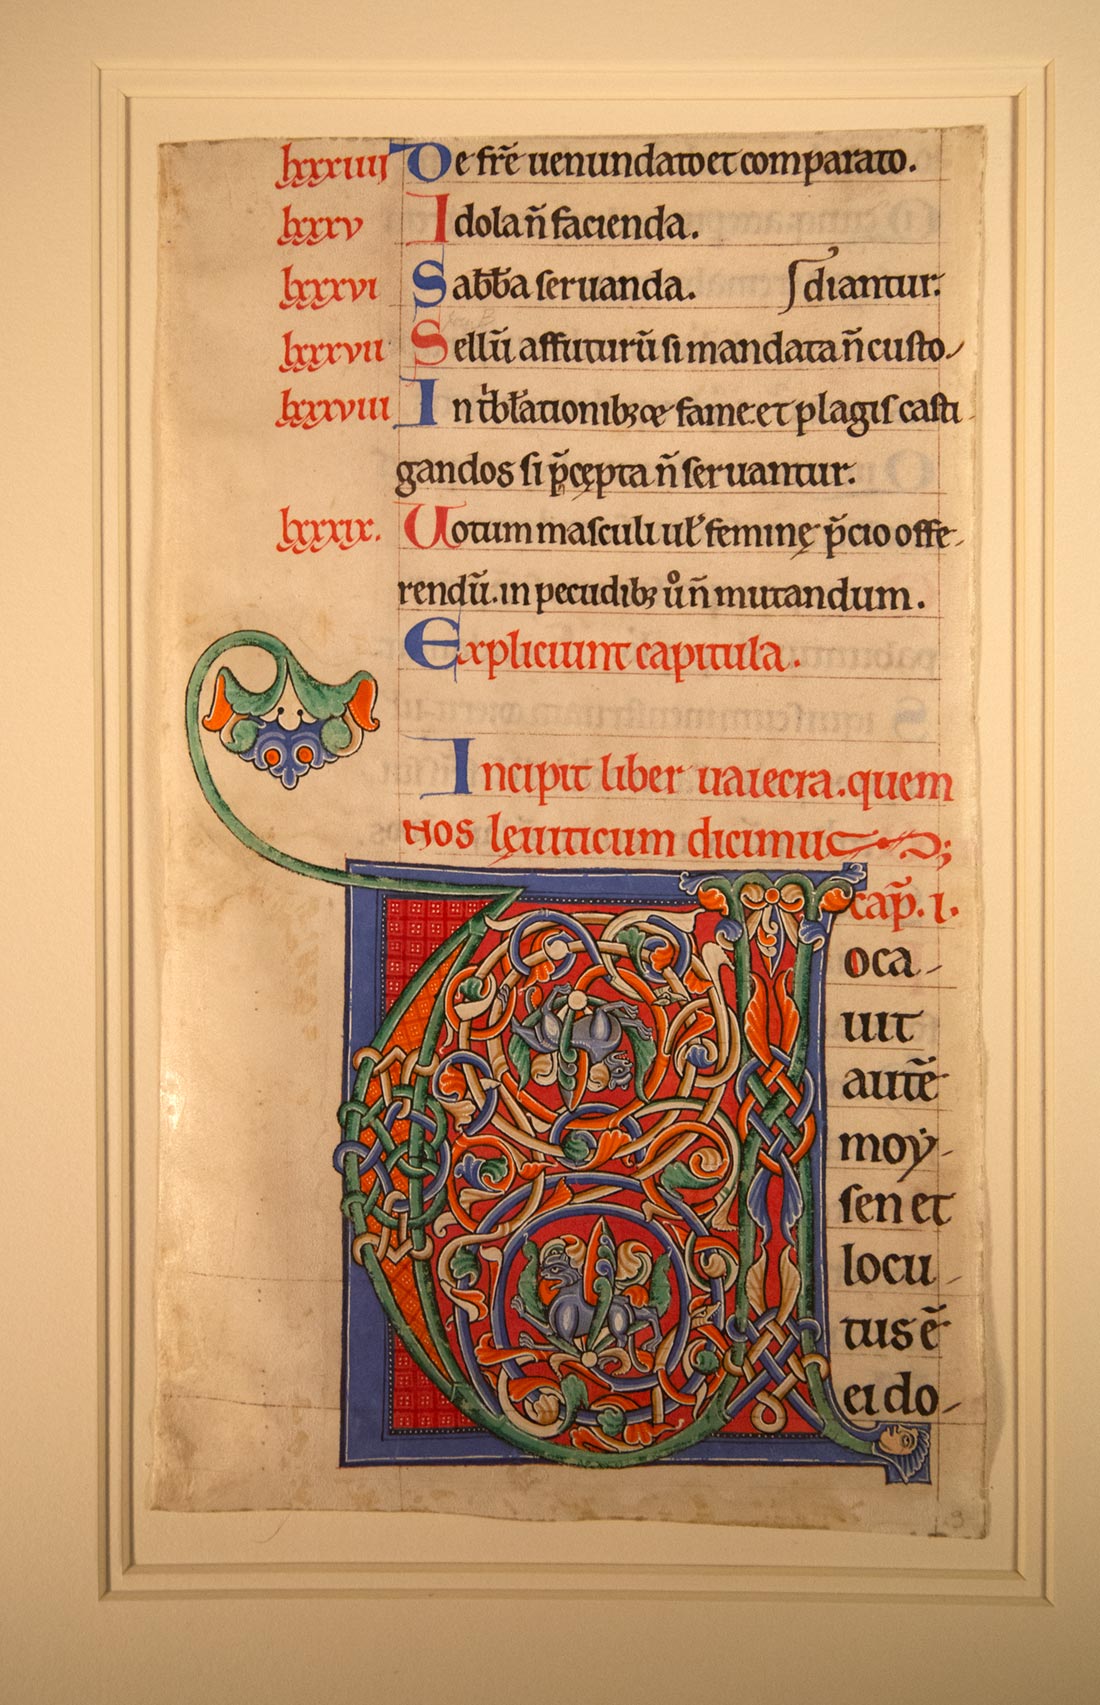 which of these manuscripts does not depict matthew